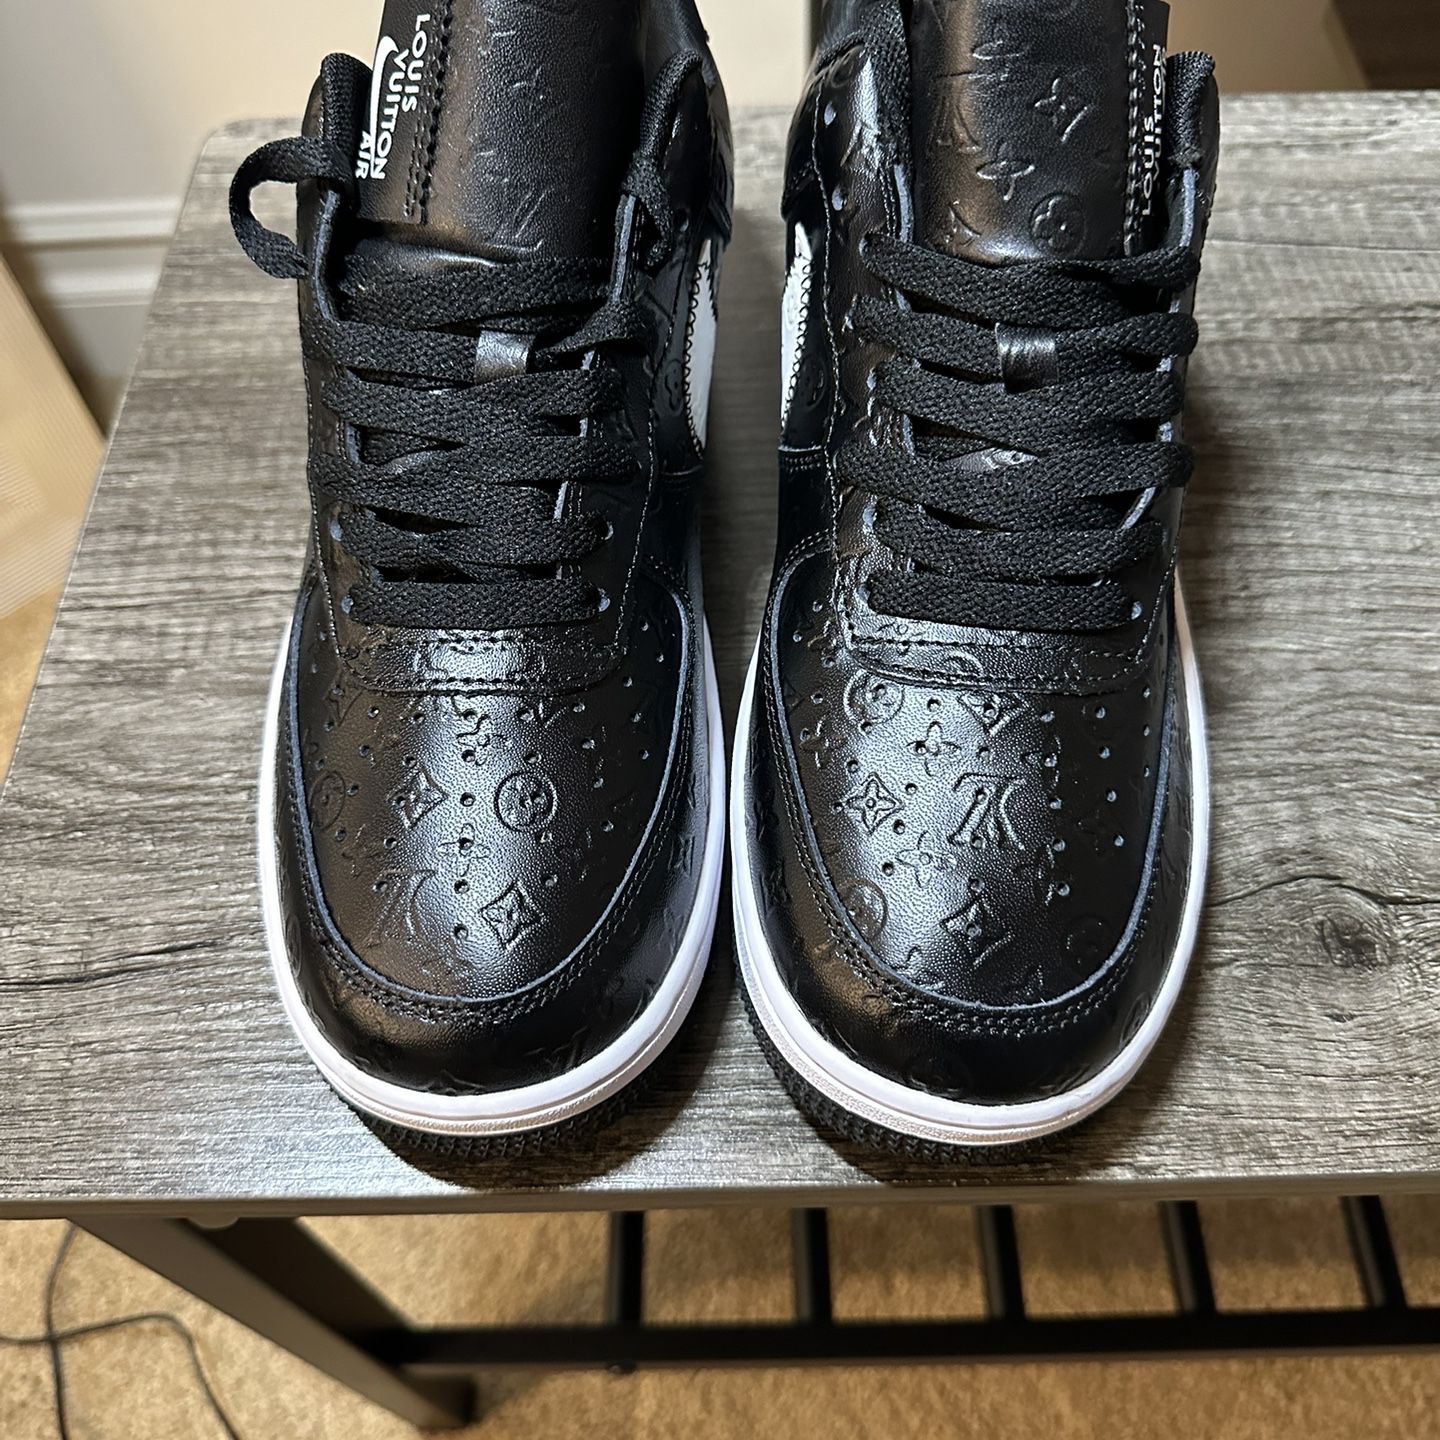 Louis Vuitton Nike Air Force 1s Glow In Dark for Sale in Corp Christi, TX -  OfferUp